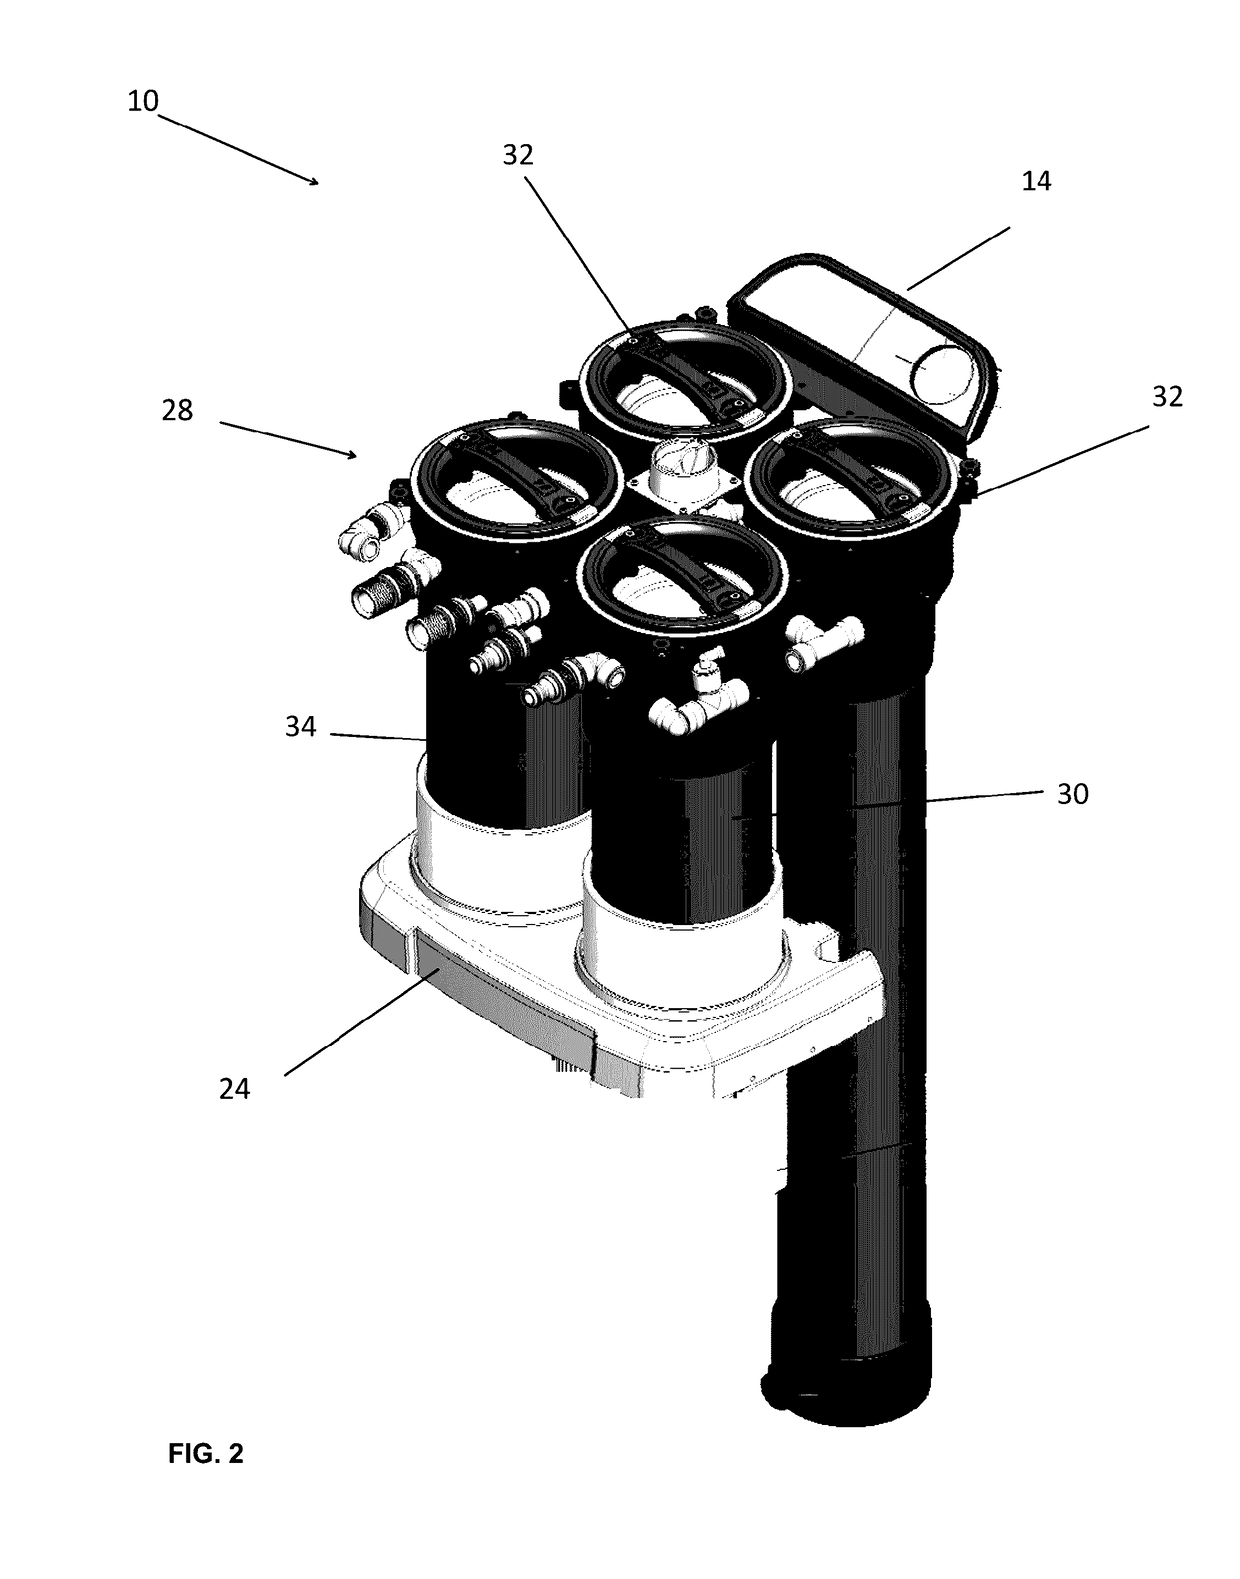 Fluid conditioning systems having caps with filter cartridge sealing and removal devices and/or locking devices